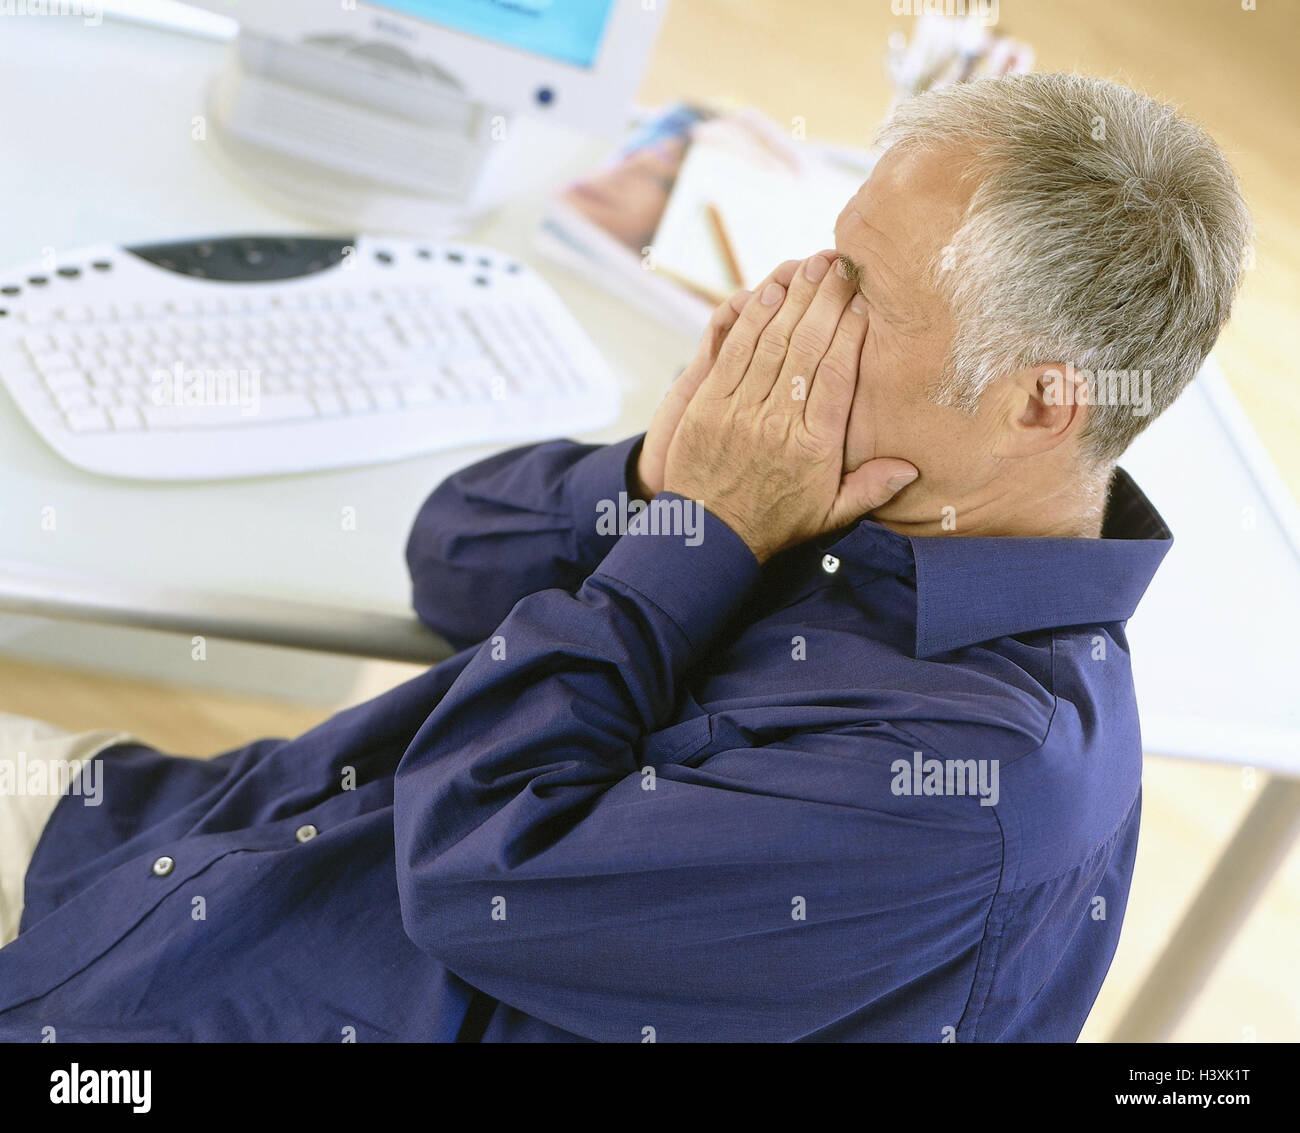 Desk, man, gesture, tiredly, depletion, model released, office, office worker, middle old person, exhausts, overtires, Übermüdung, fatigue, reworks, rewrite, side view, Stock Photo